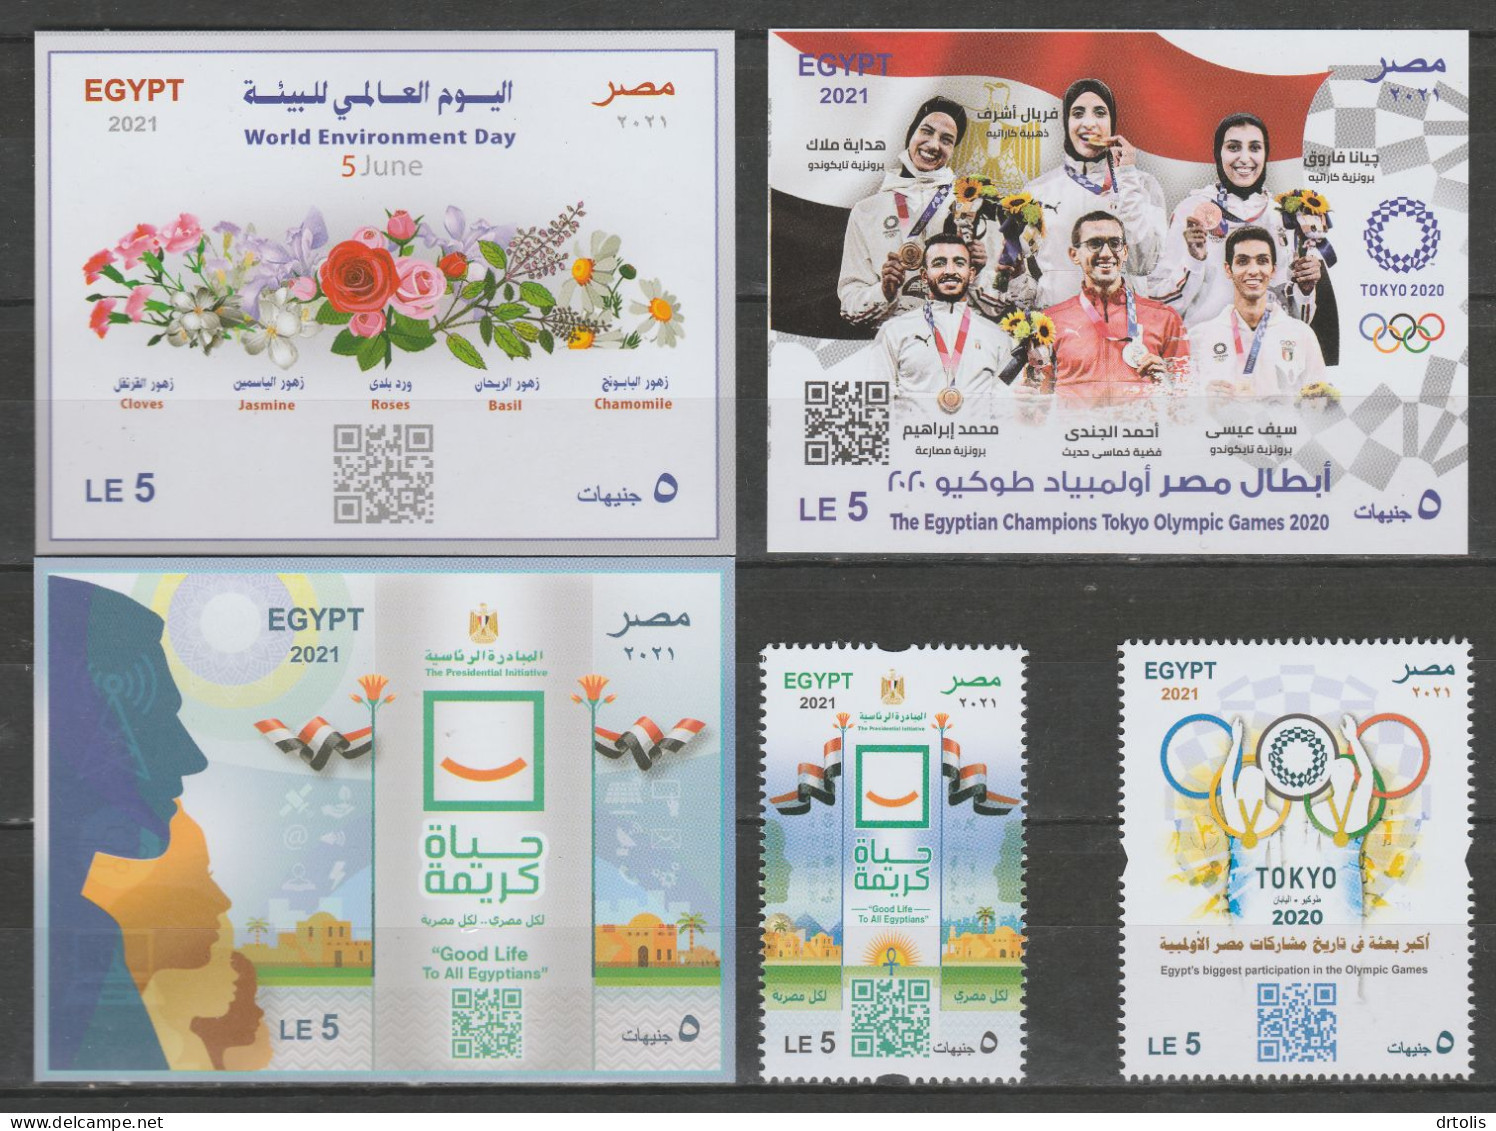 EGYPT / 2021 / COMPLETE YEAR ISSUES  / MNH / VF/ 9 SCANS - Nuevos